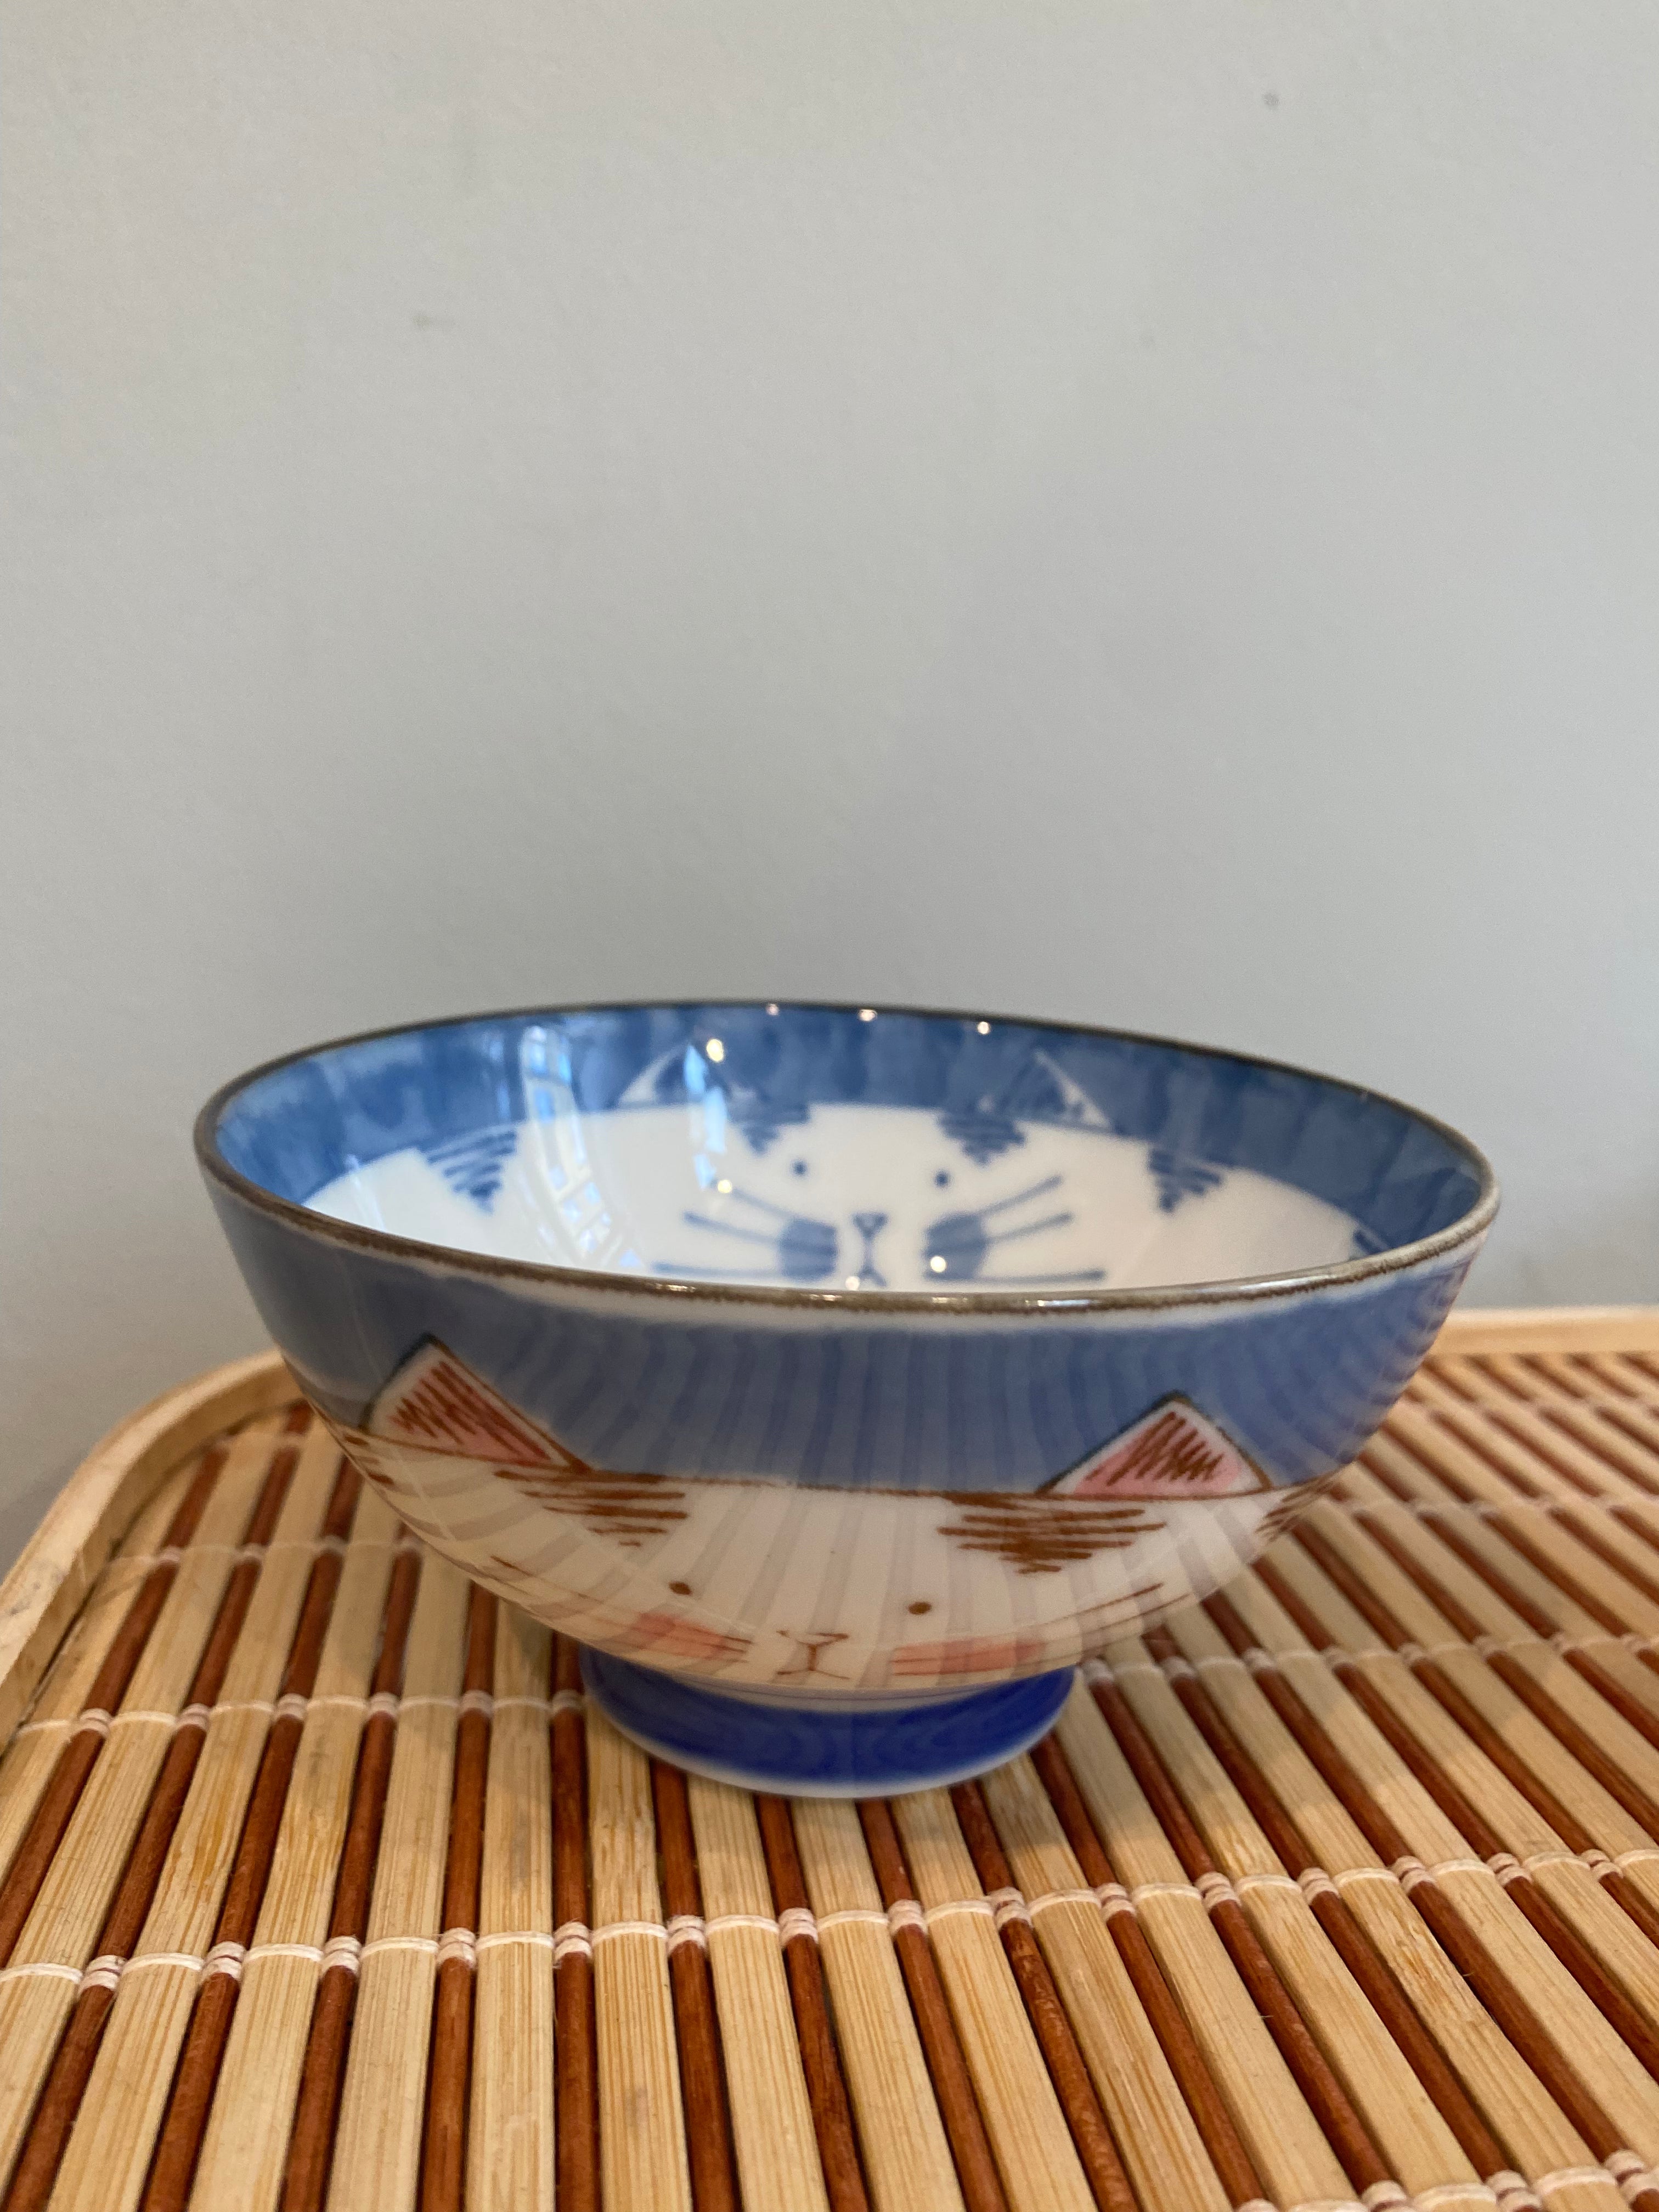 Cat bowls with a cat motif on the outside and inside